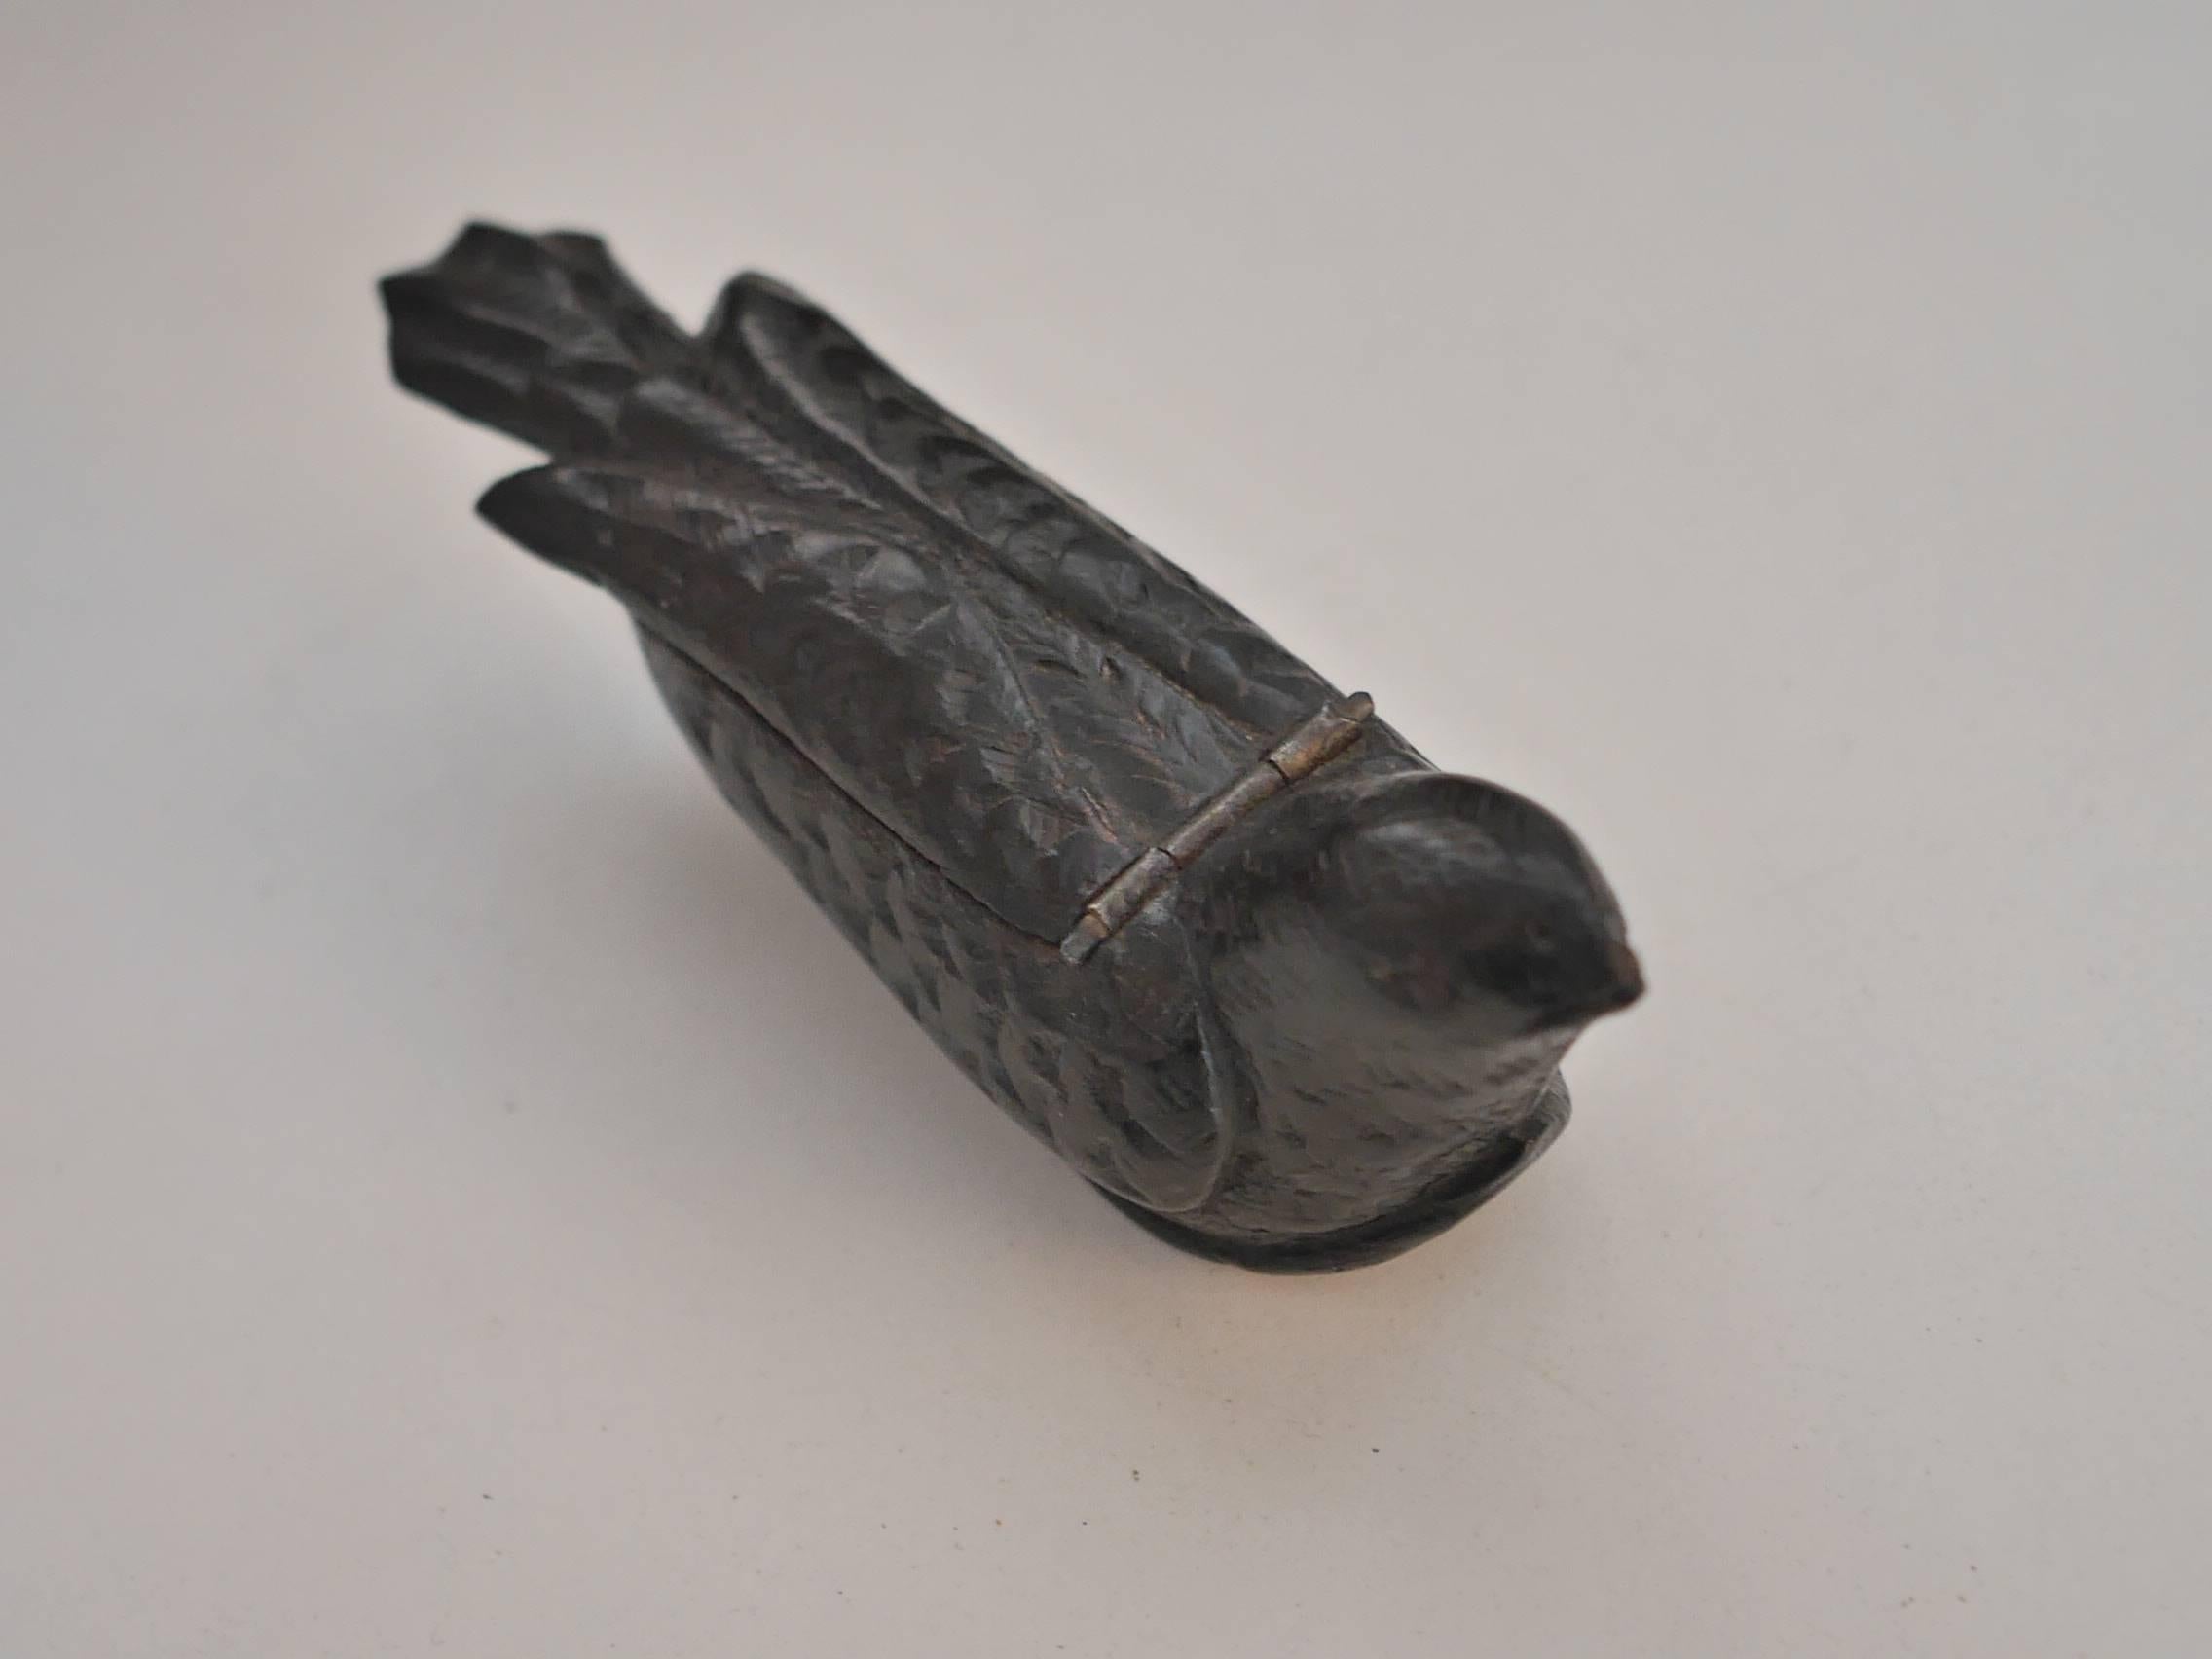 Unique walnut-tree snuffbox, carved as a bird but the bottom part also features a sabot (a kind of simple shoe, shaped and hollowed out from a single block of wood, traditionally worn by French and Breton peasants). 
The engraving work is